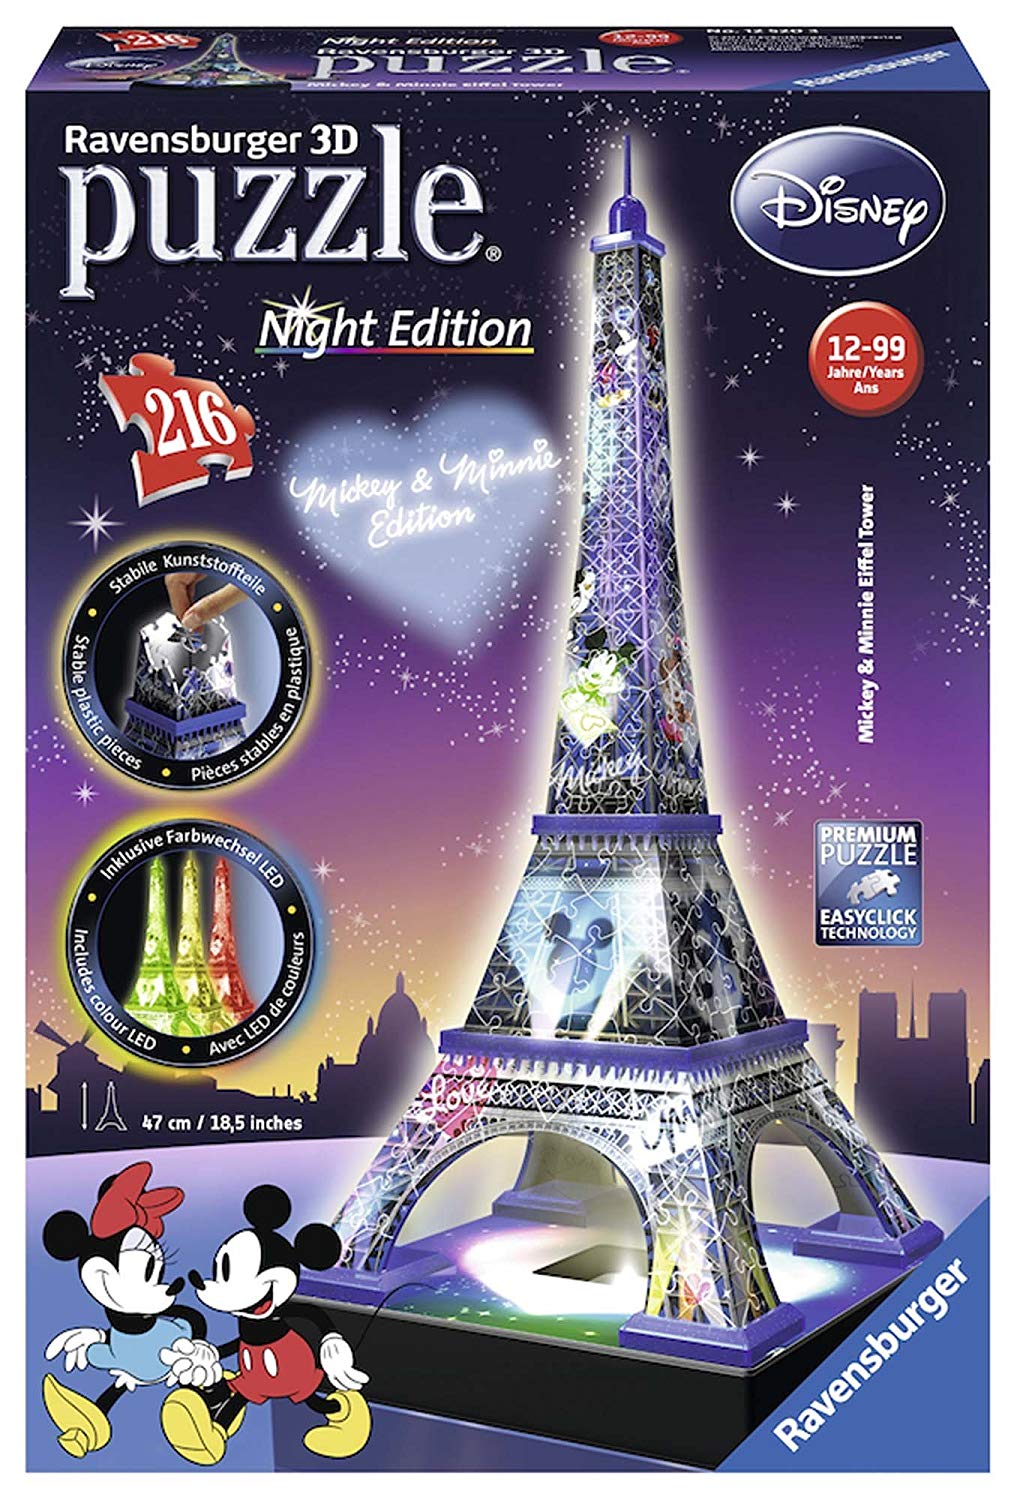 Eiffel Tower by Night, 3D Puzzle Buildings